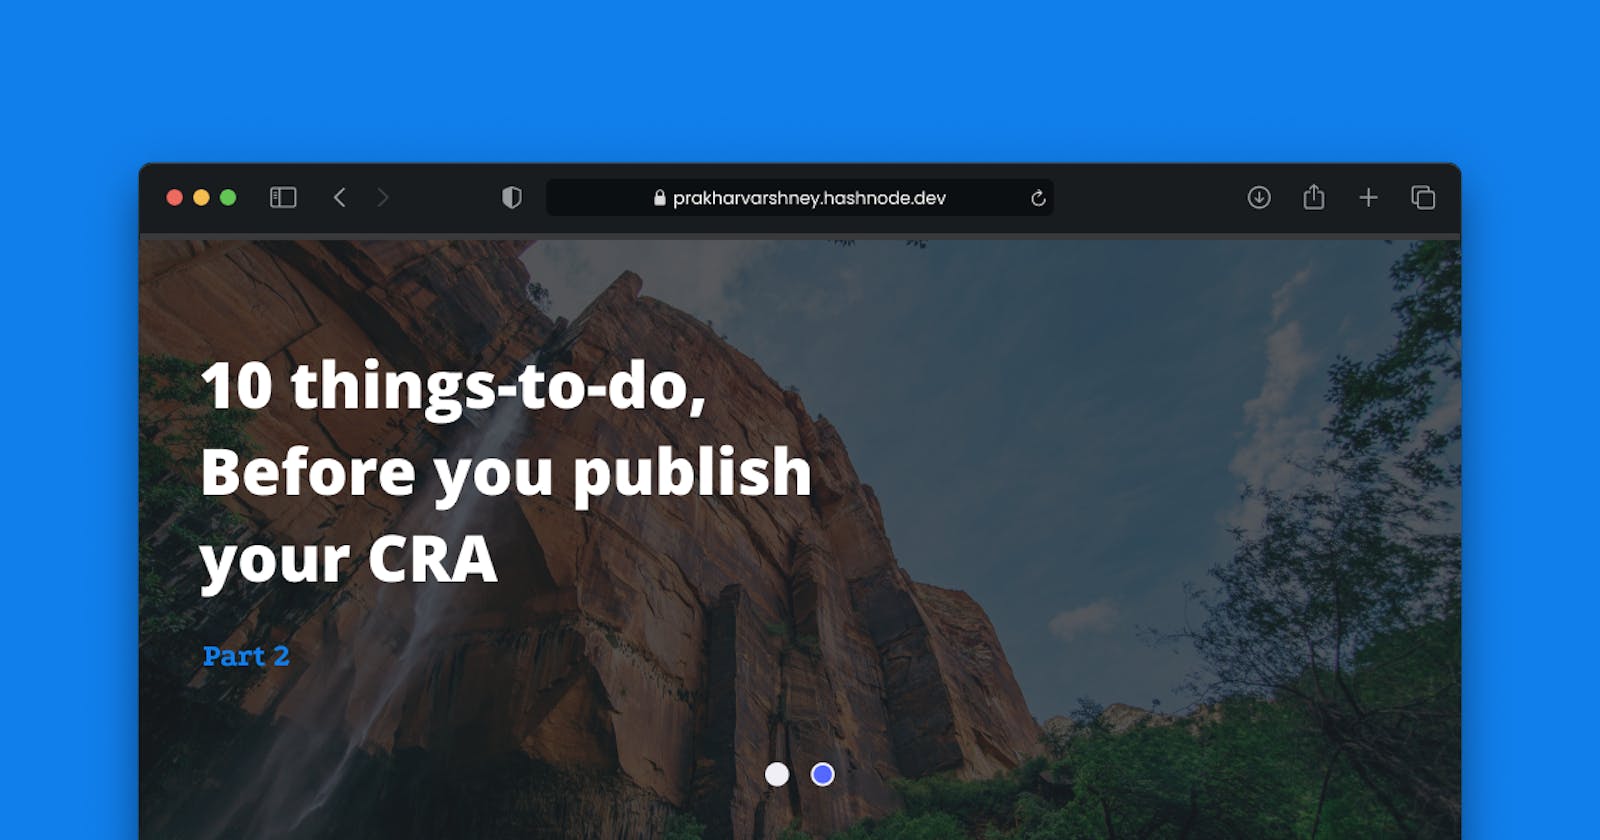 10 things-to-do, Before you publish your CRA - Part 2